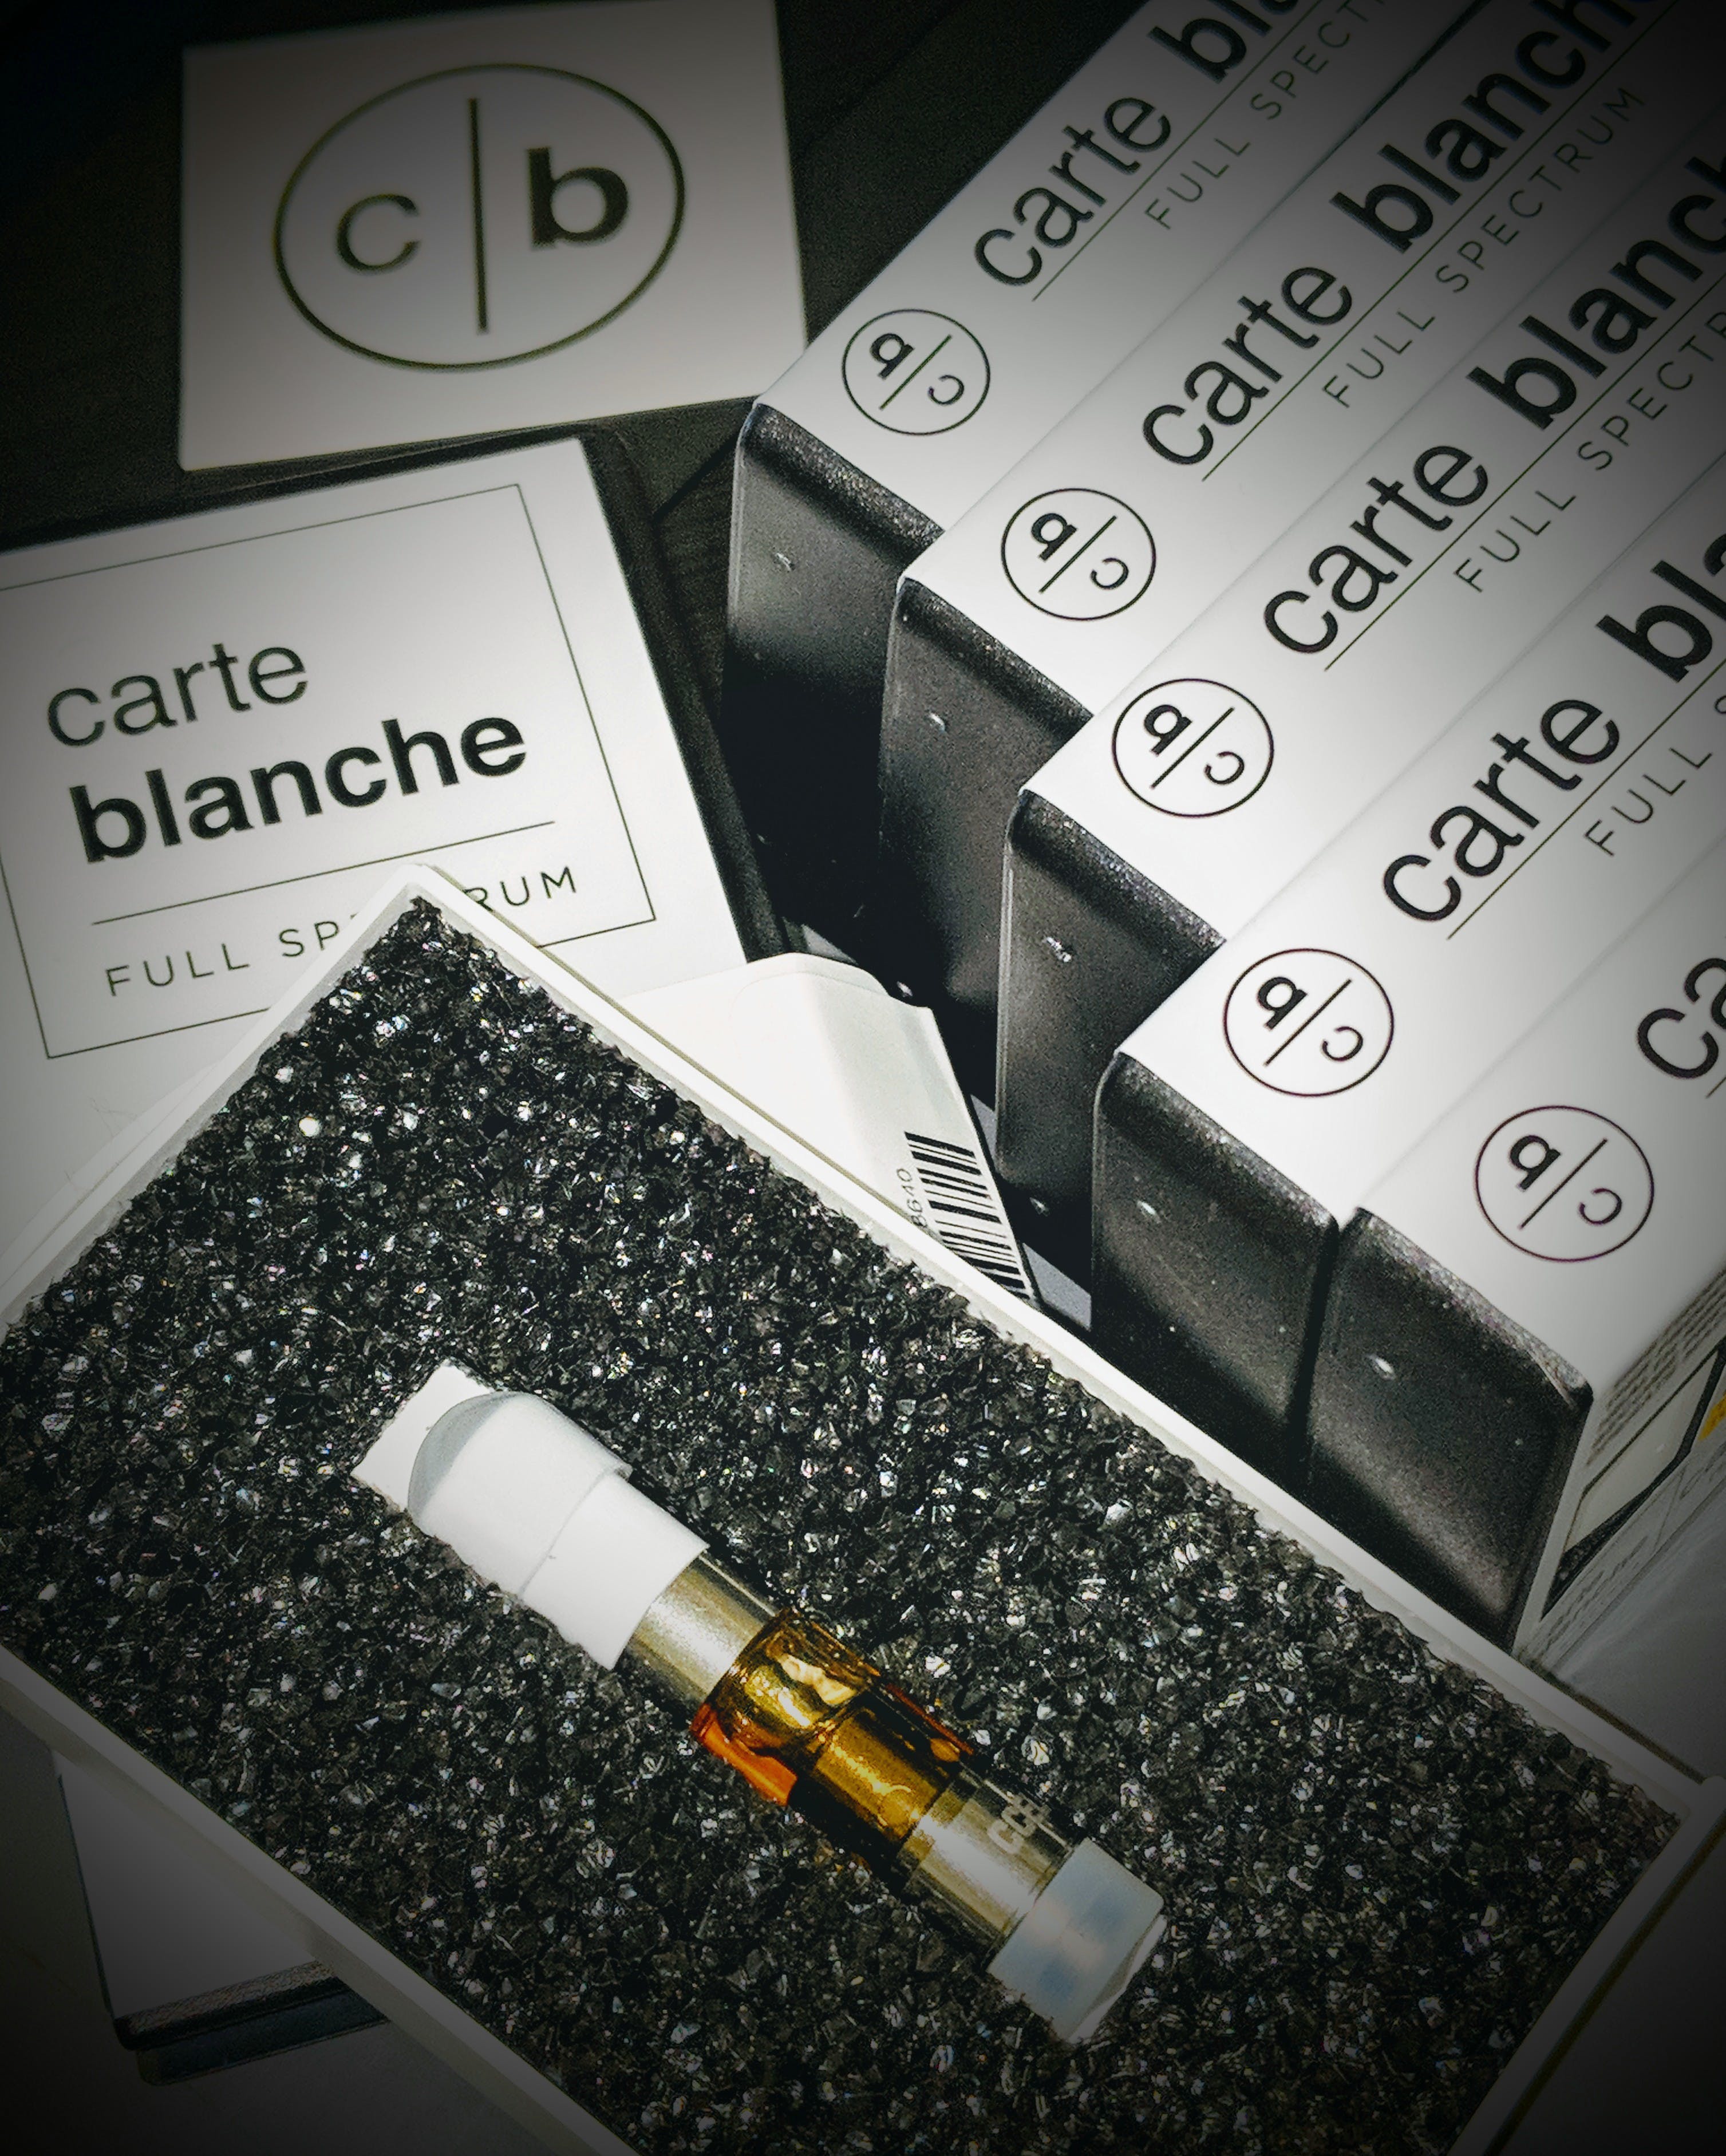 concentrate-carte-blanche-cartridges-from-madrone